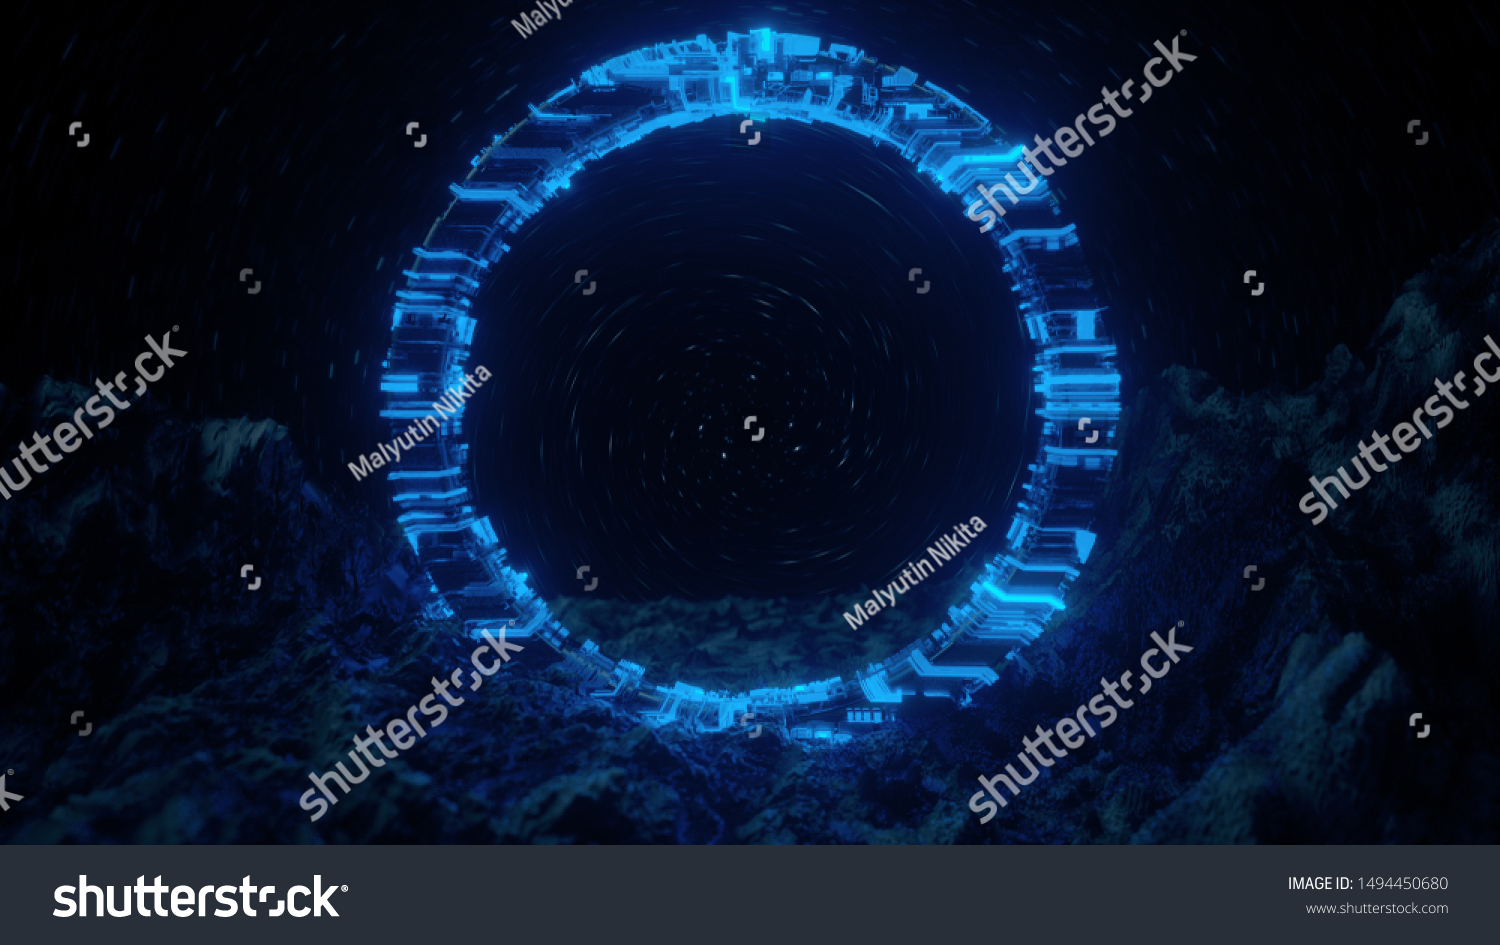 Cosmic landscape and circuit ring sci fi #1494450680